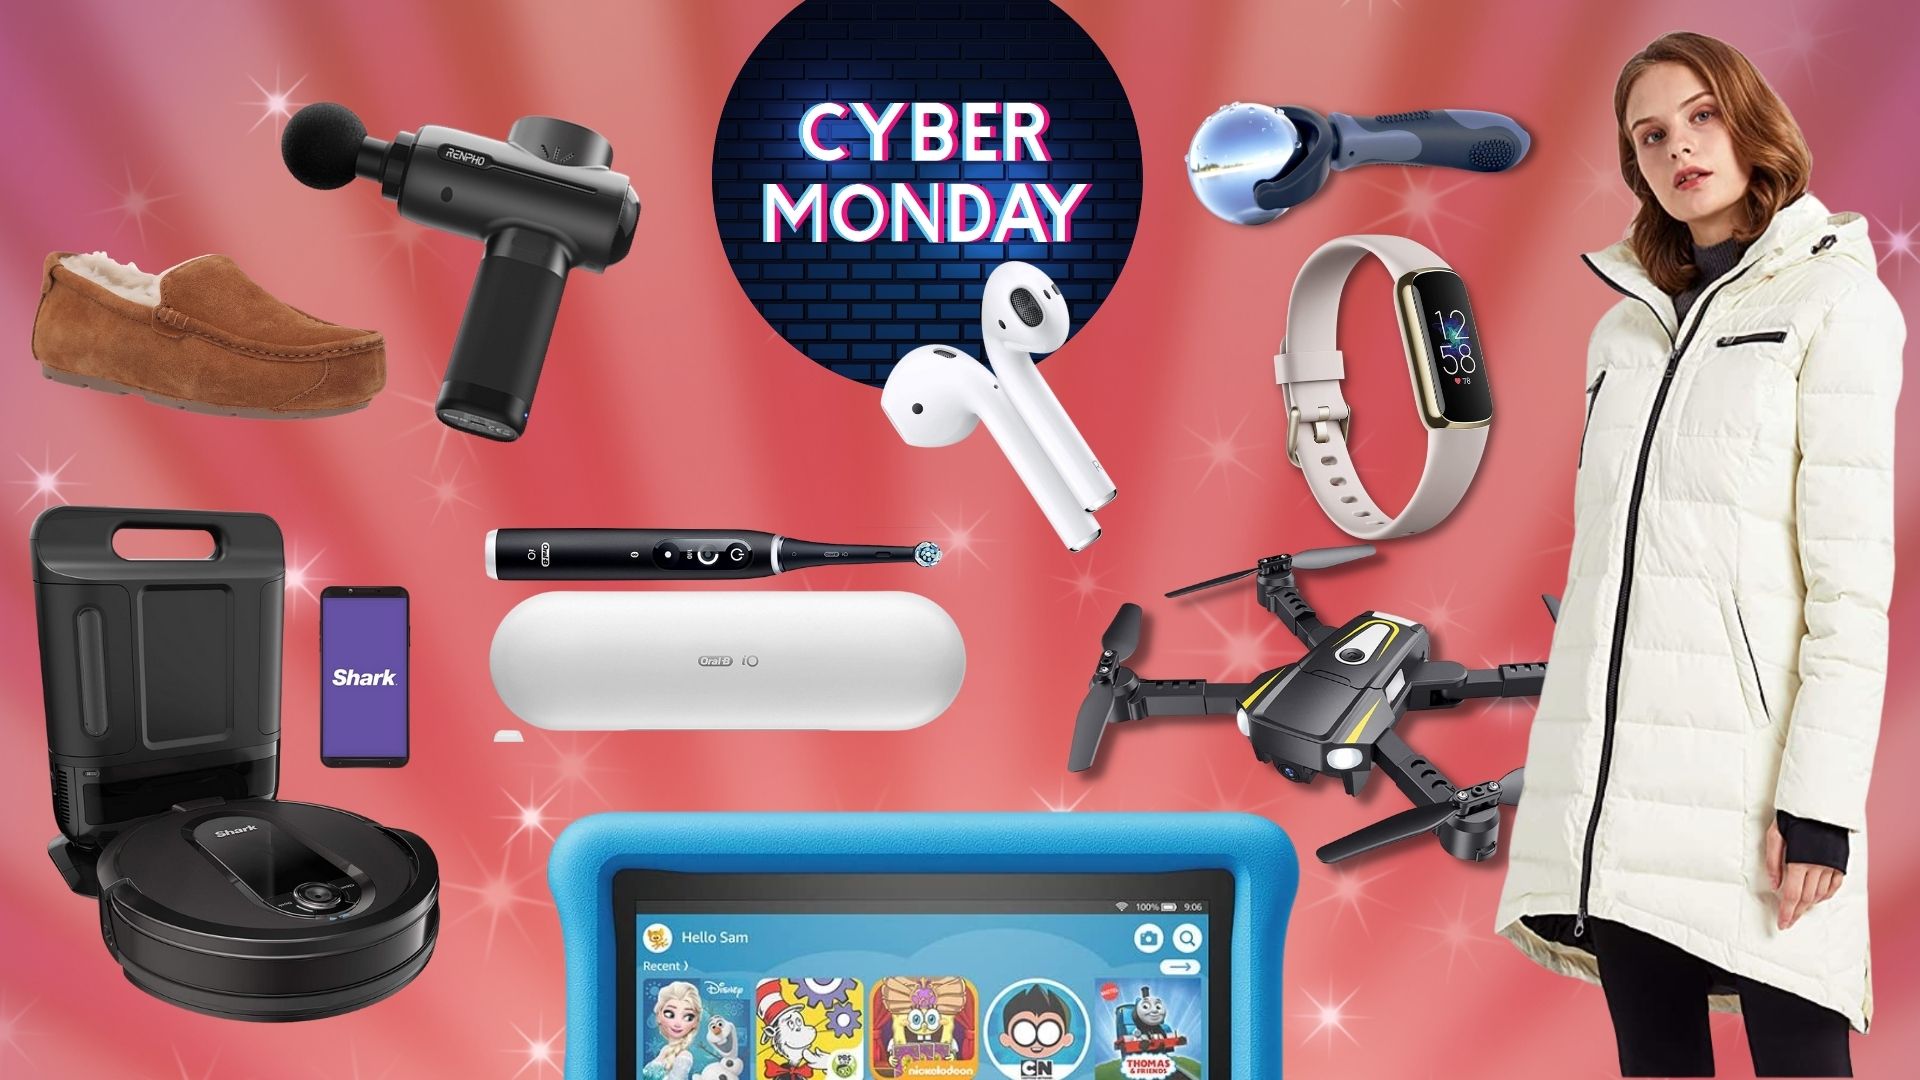 dækning Næb Til fods 46 Incredible Cyber Week Deals That Are Bigger Than Black Friday- Woman's  World